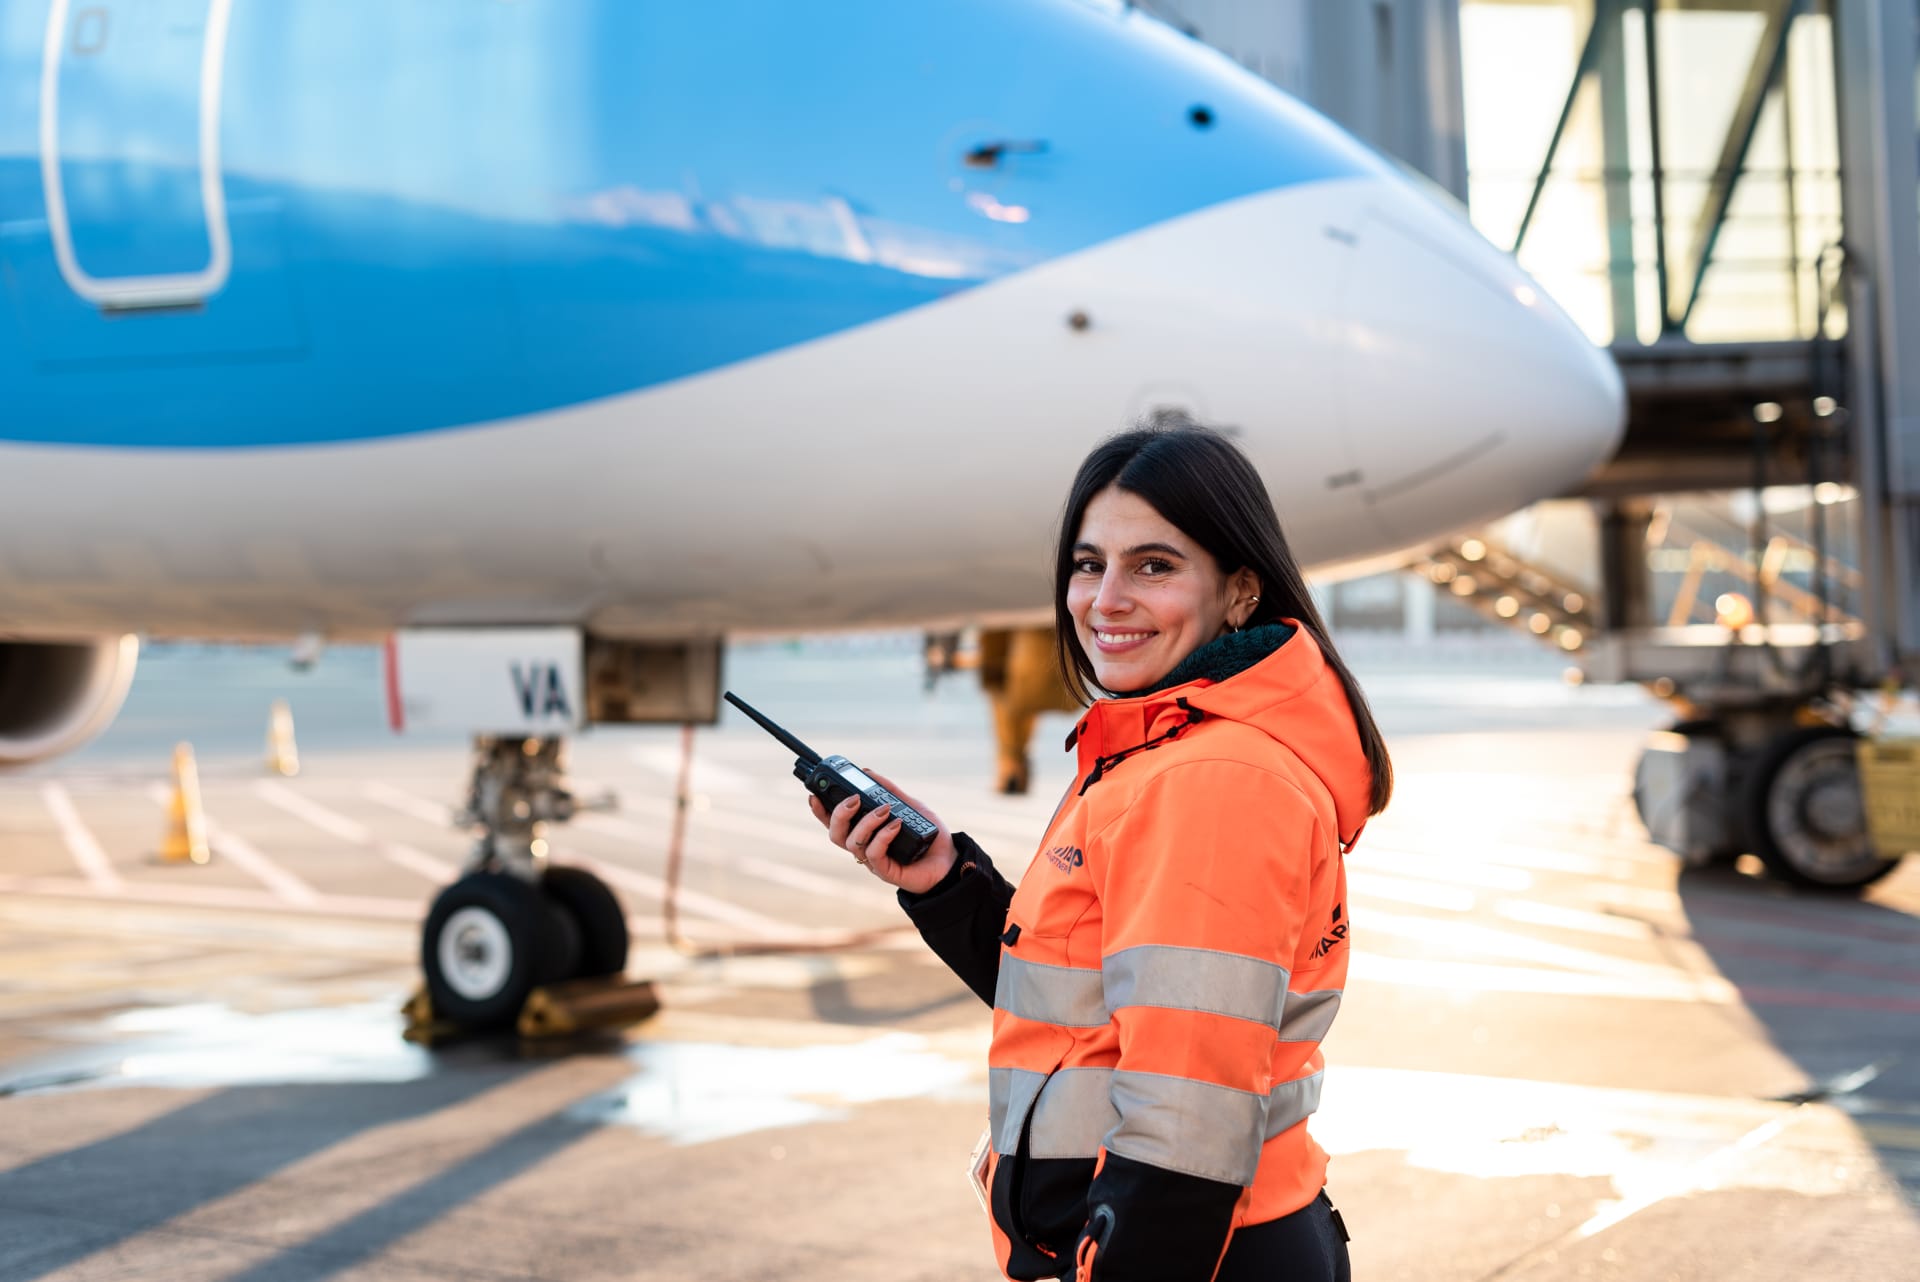 A Turnaround Coordinator at Aviapartner stand in front of a TUI plane on tarmac at Brussels Airport holding a trunk to communicate